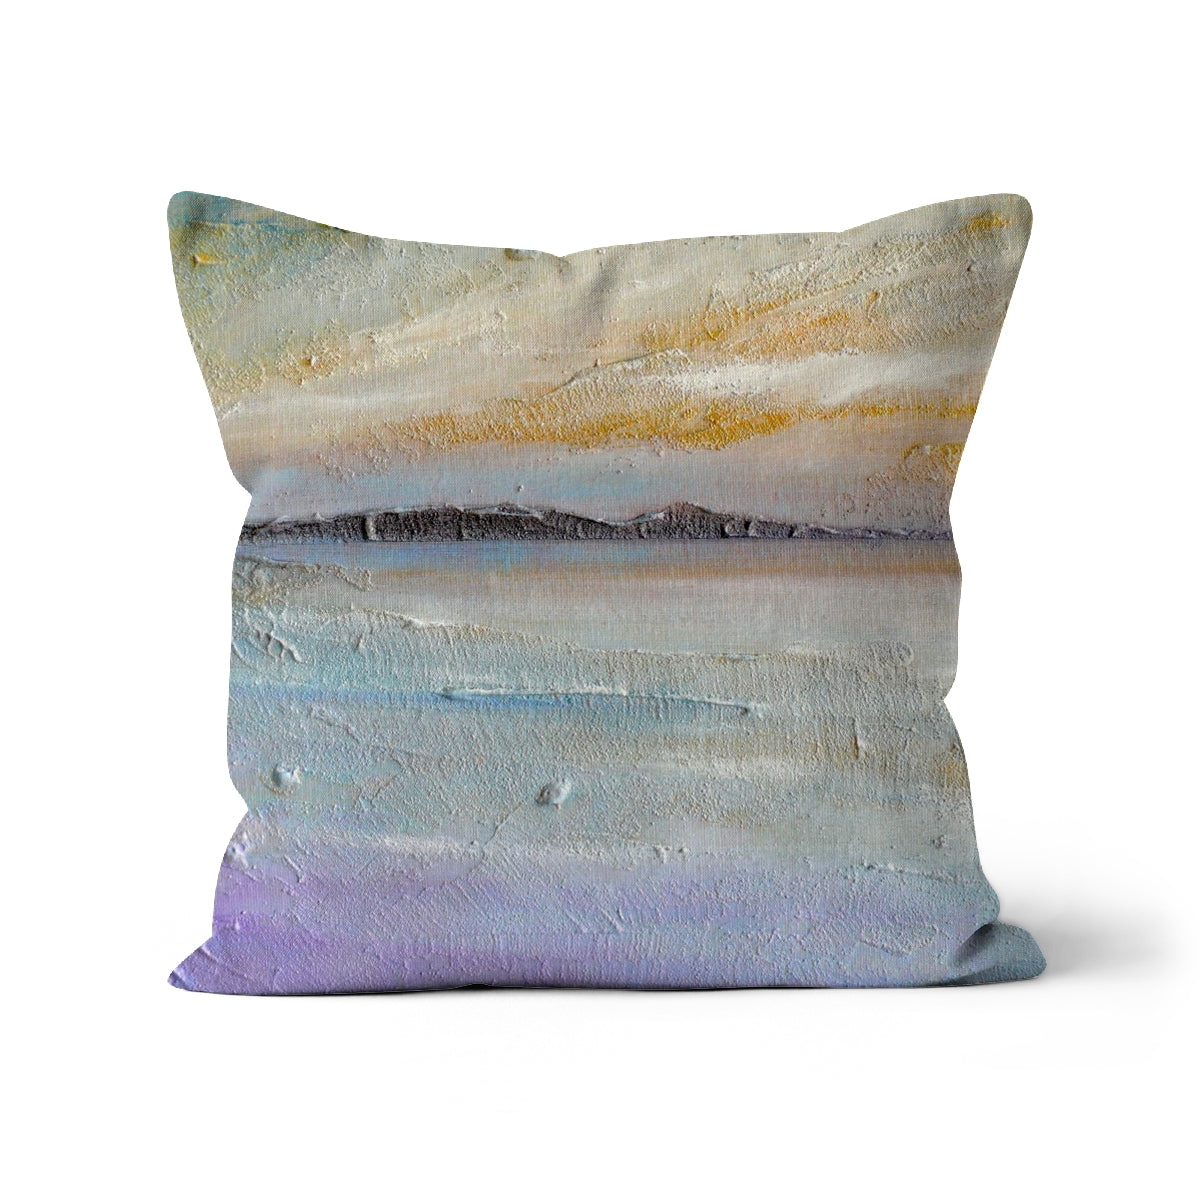 Sollas Beach South Uist Art Gifts Cushion-Cushions-Hebridean Islands Art Gallery-Canvas-22"x22"-Paintings, Prints, Homeware, Art Gifts From Scotland By Scottish Artist Kevin Hunter